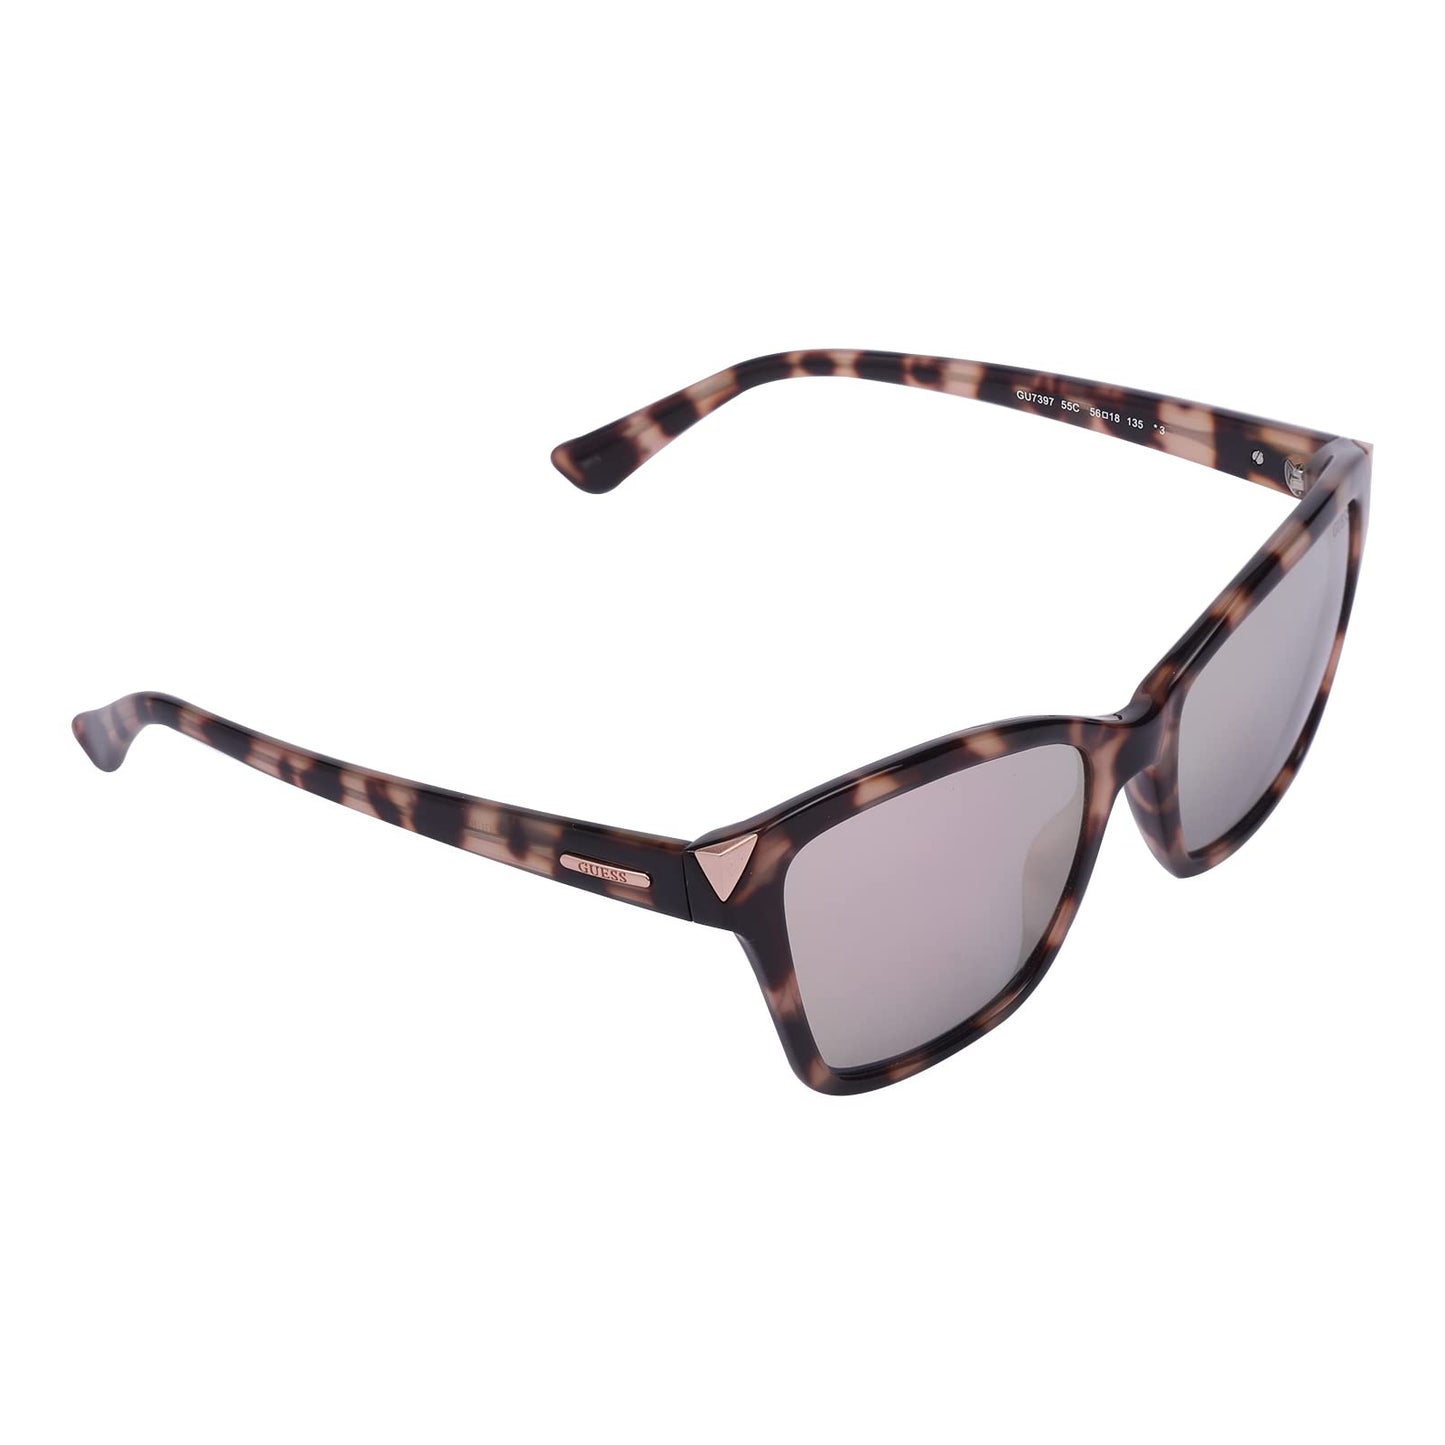 GUESS Mirrored Cat Eye Women's Sunglasses 7397 55C|56|Gold Color Lens